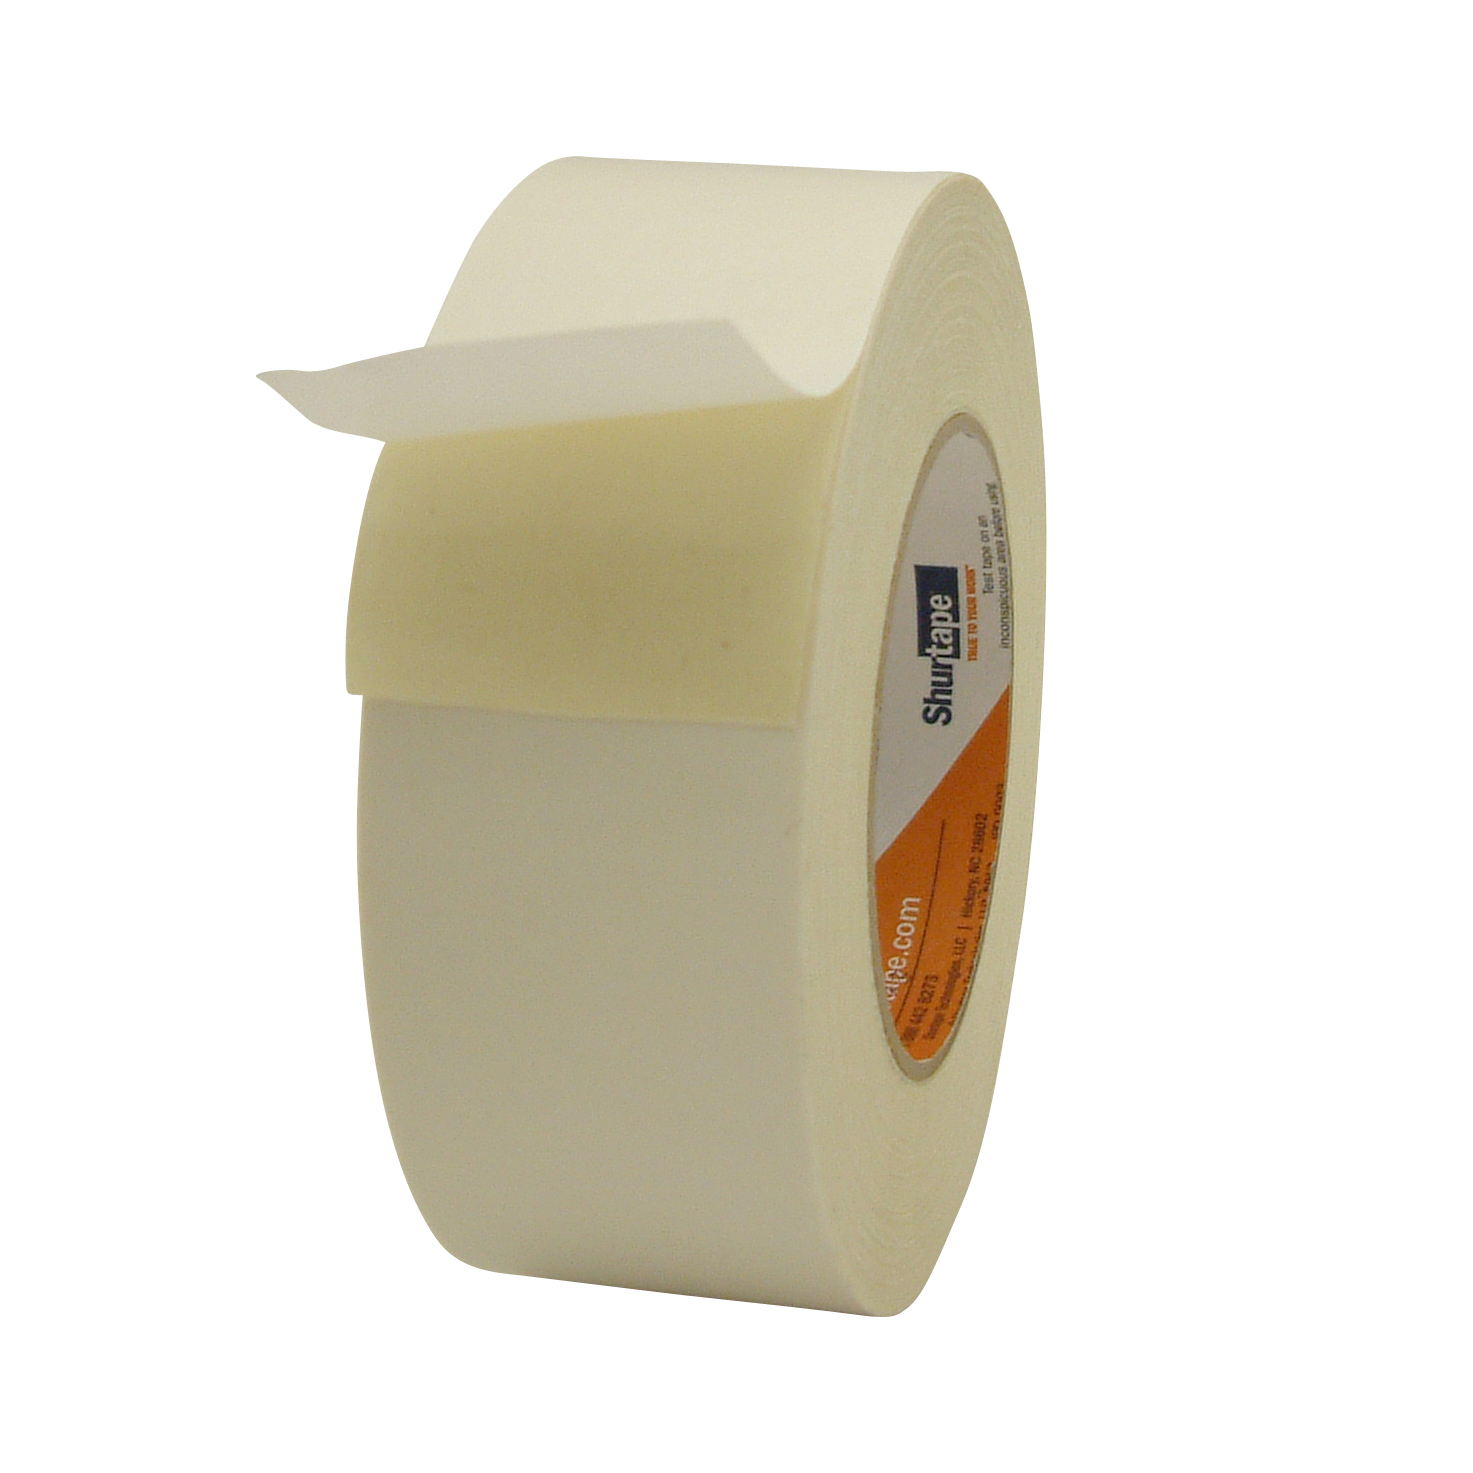 Shurtape DF-642 Industrial-Grade Double-Sided Cloth Tape